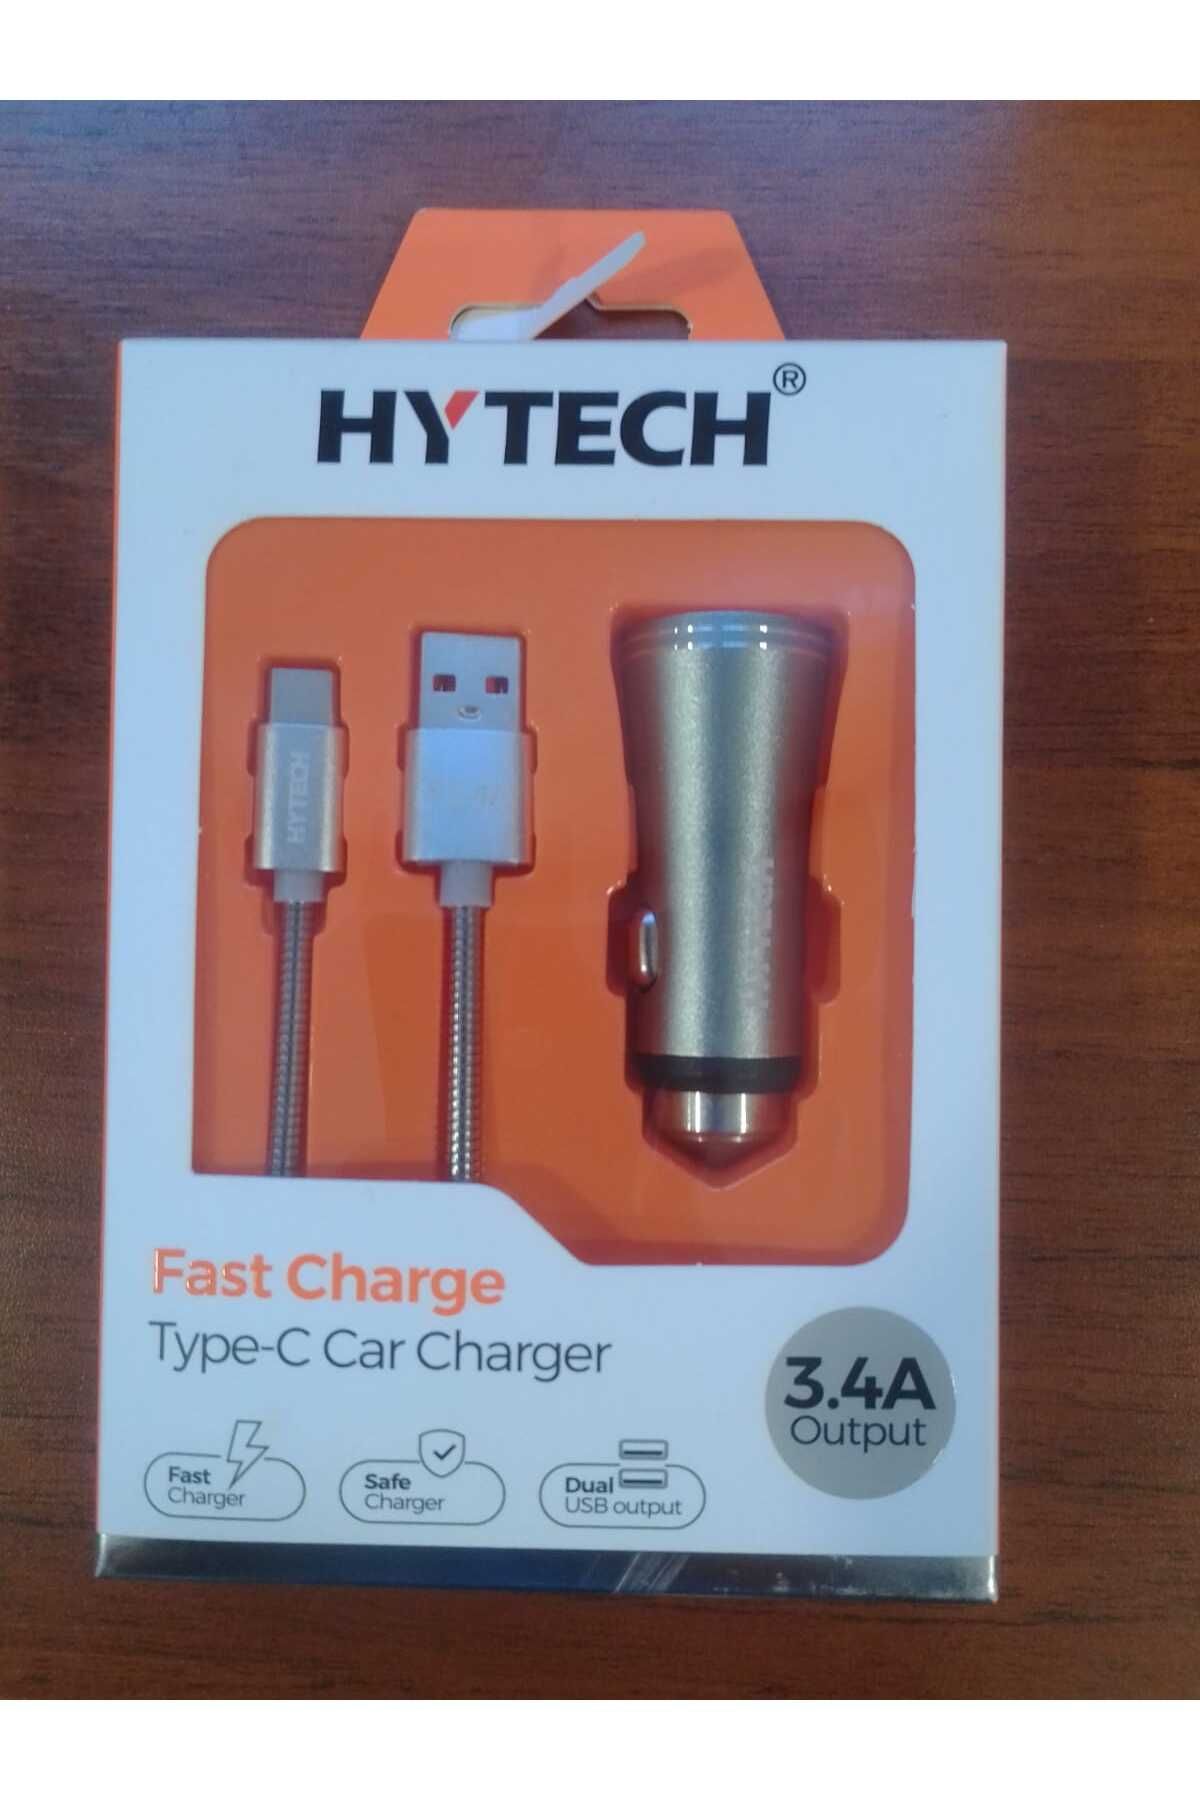 Hytech HY-X66 3.4A Fast Charging Type-C Wired 2 USB Silver Metal Car Charger - Segment